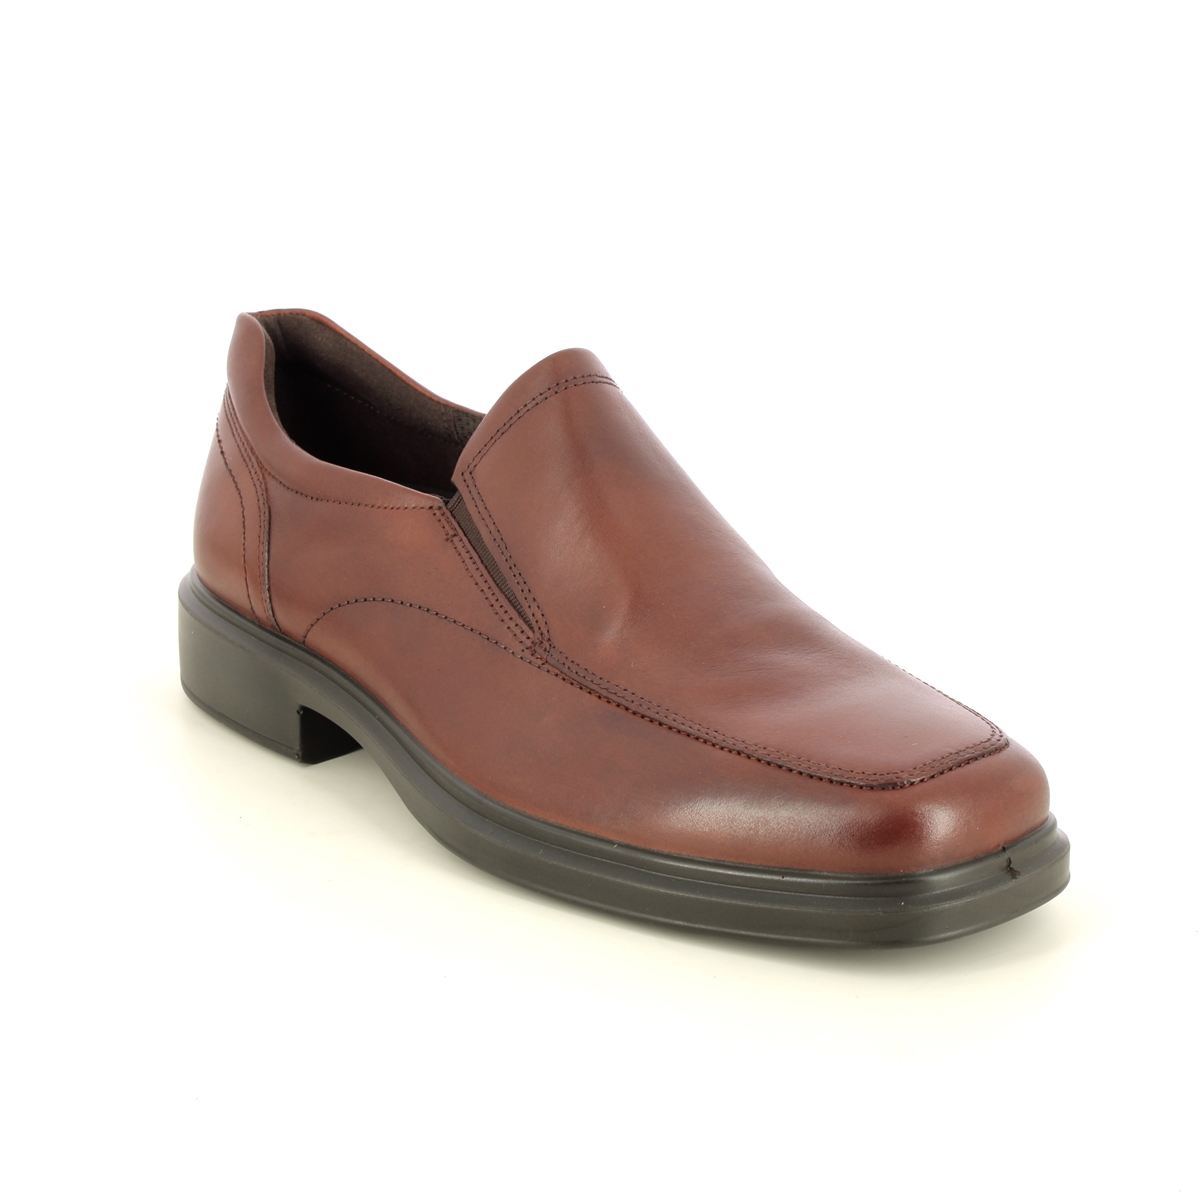 ECCO Helsinki 2 Slip Brown leather Mens Slip-on Shoes 500154-01053 in a Plain Leather in Size 40